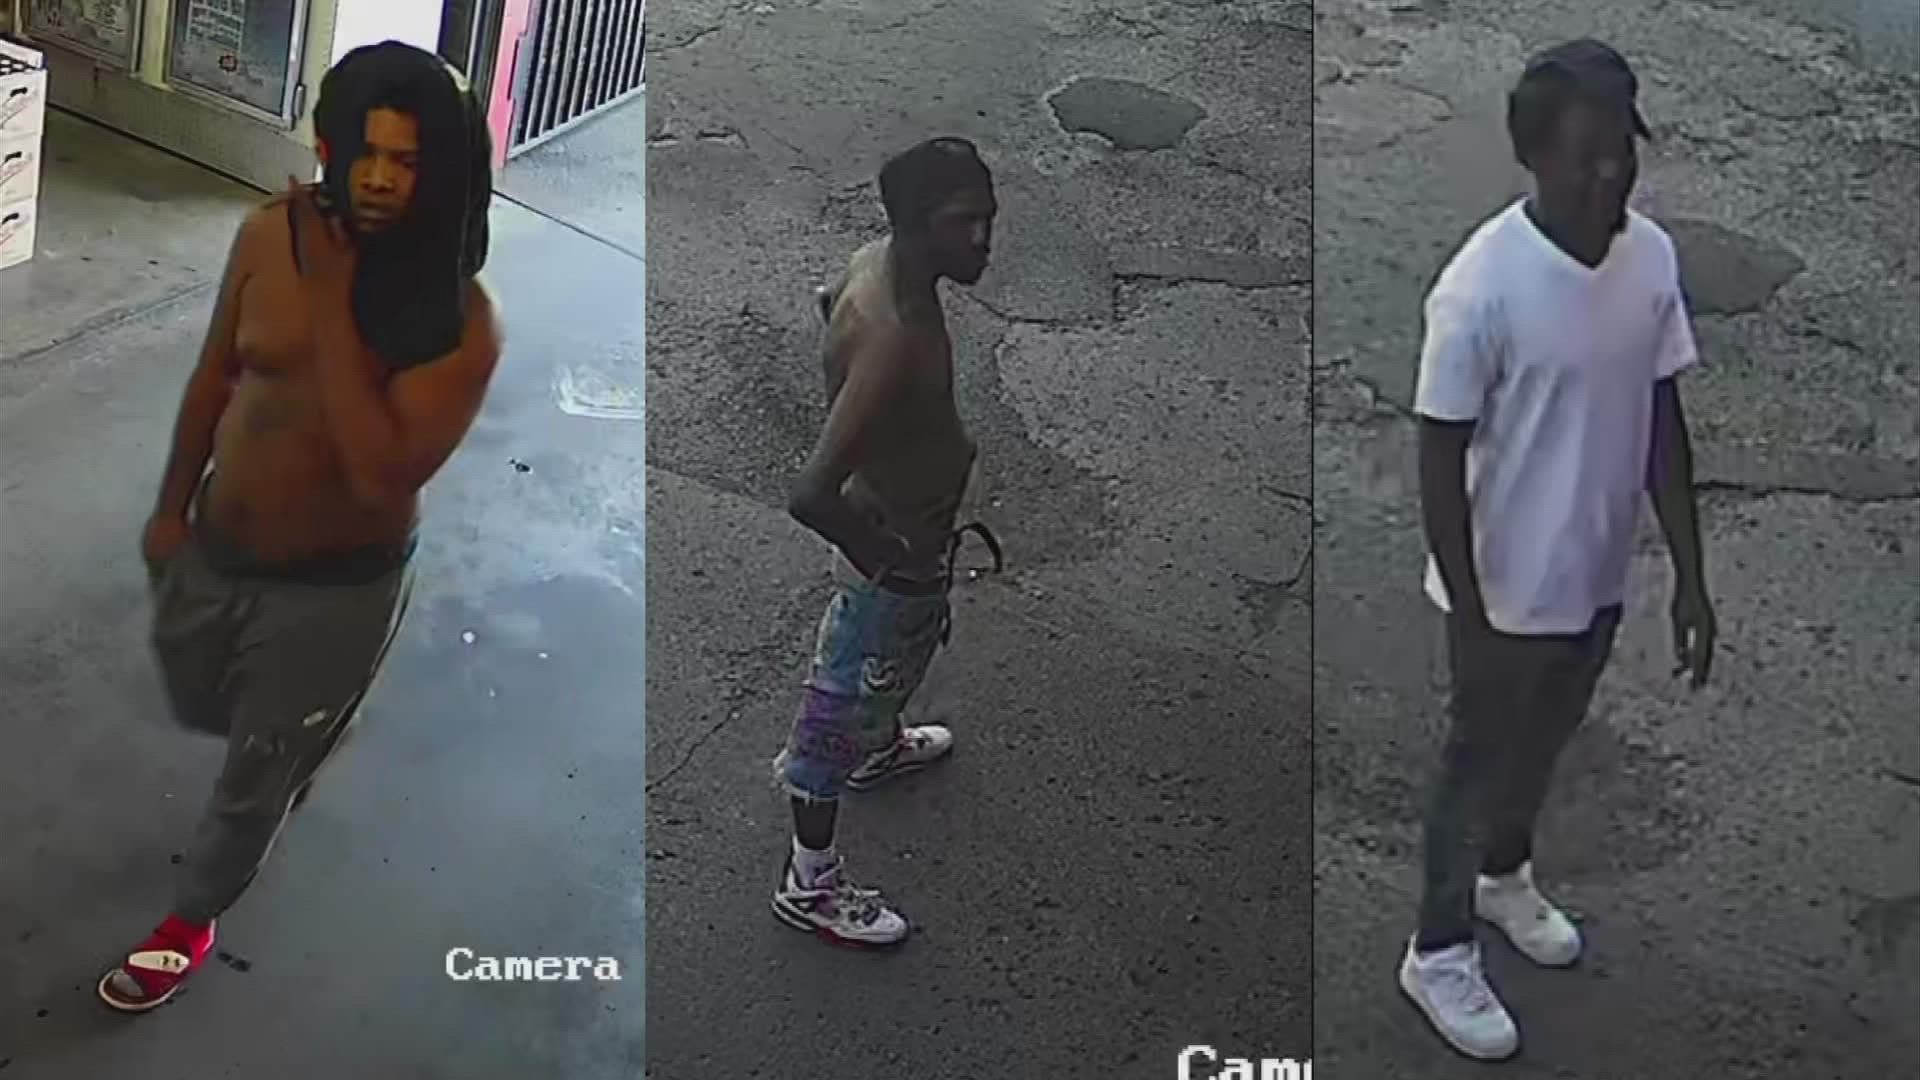 The sheriff’s office released surveillance video images of the individuals involved in the shooting to help identify them.